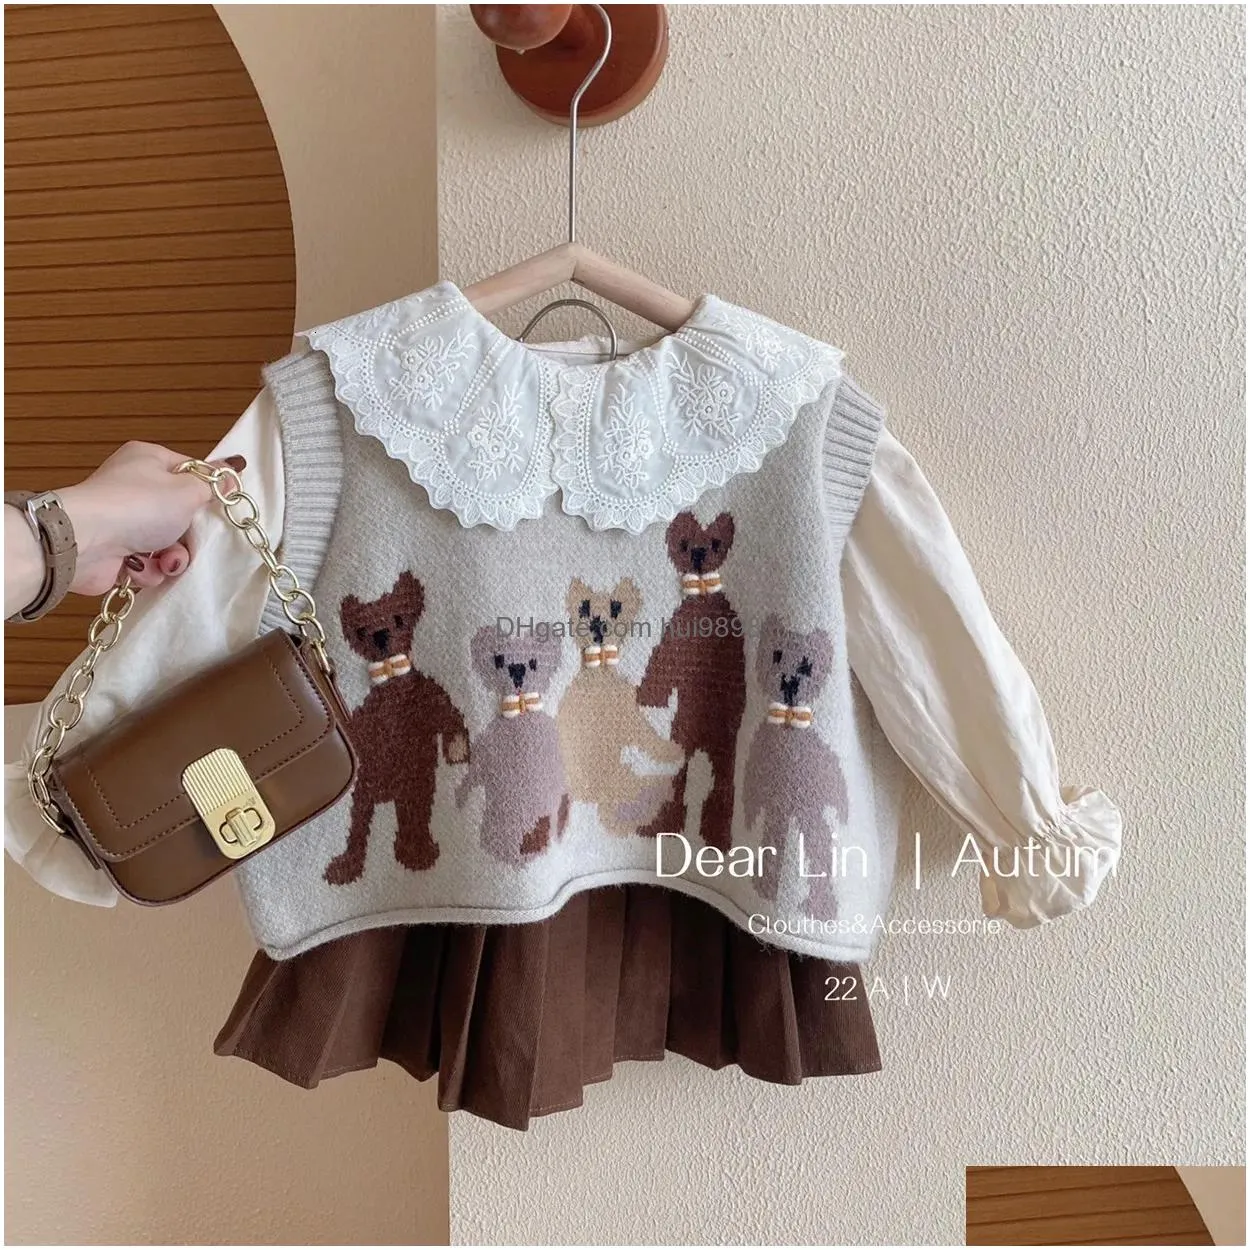 clothing sets girls sweet suits autumn outfit baby college spring pleated skirtsweater vestshirt 3pcs kids 230923